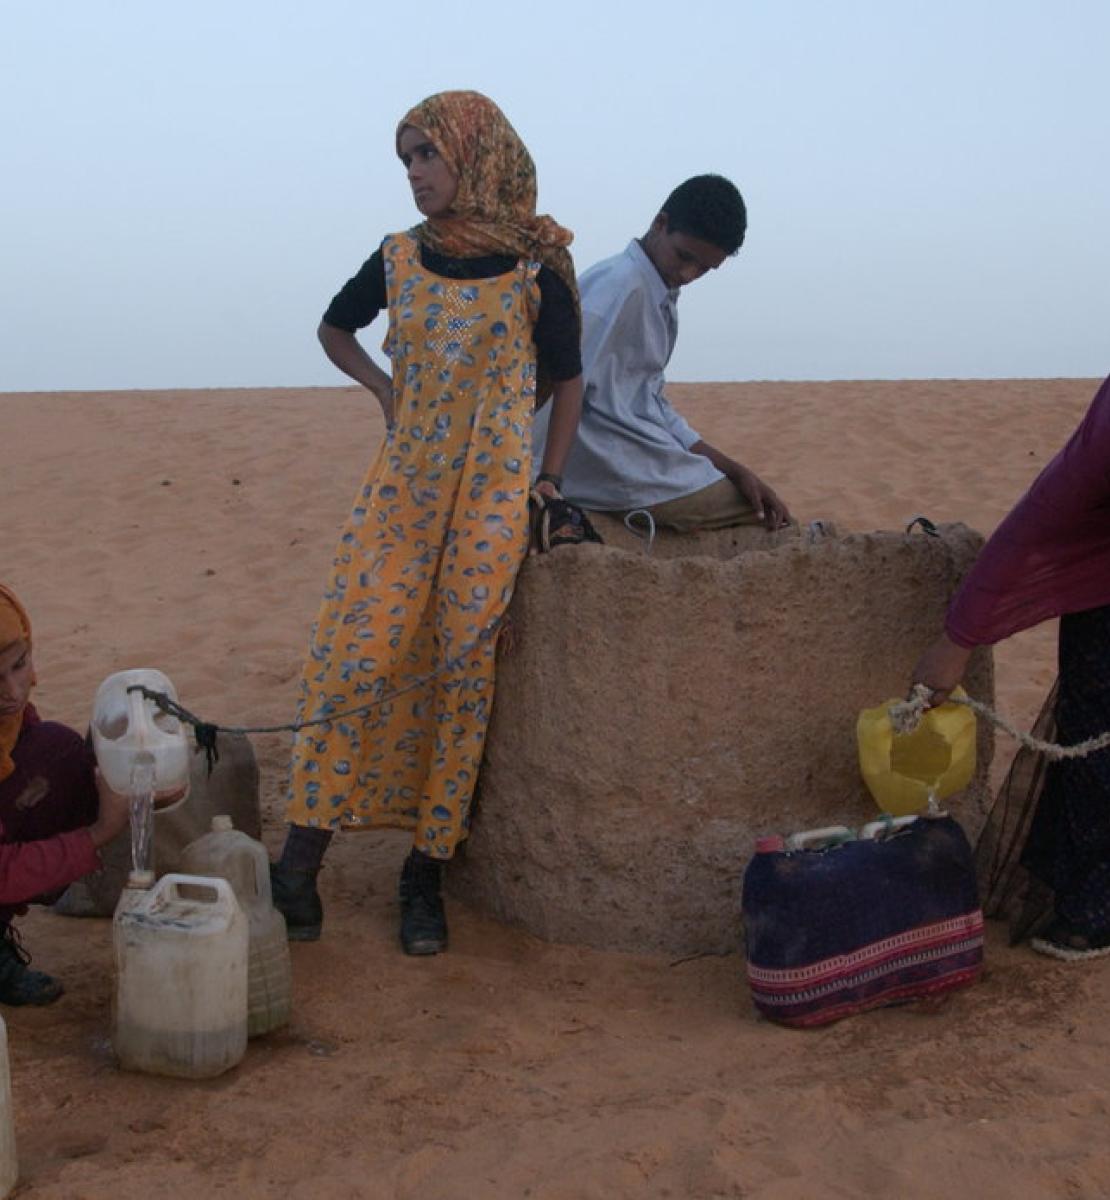 In a red-sanded desert, four young people try to fill up water jugs from a well.